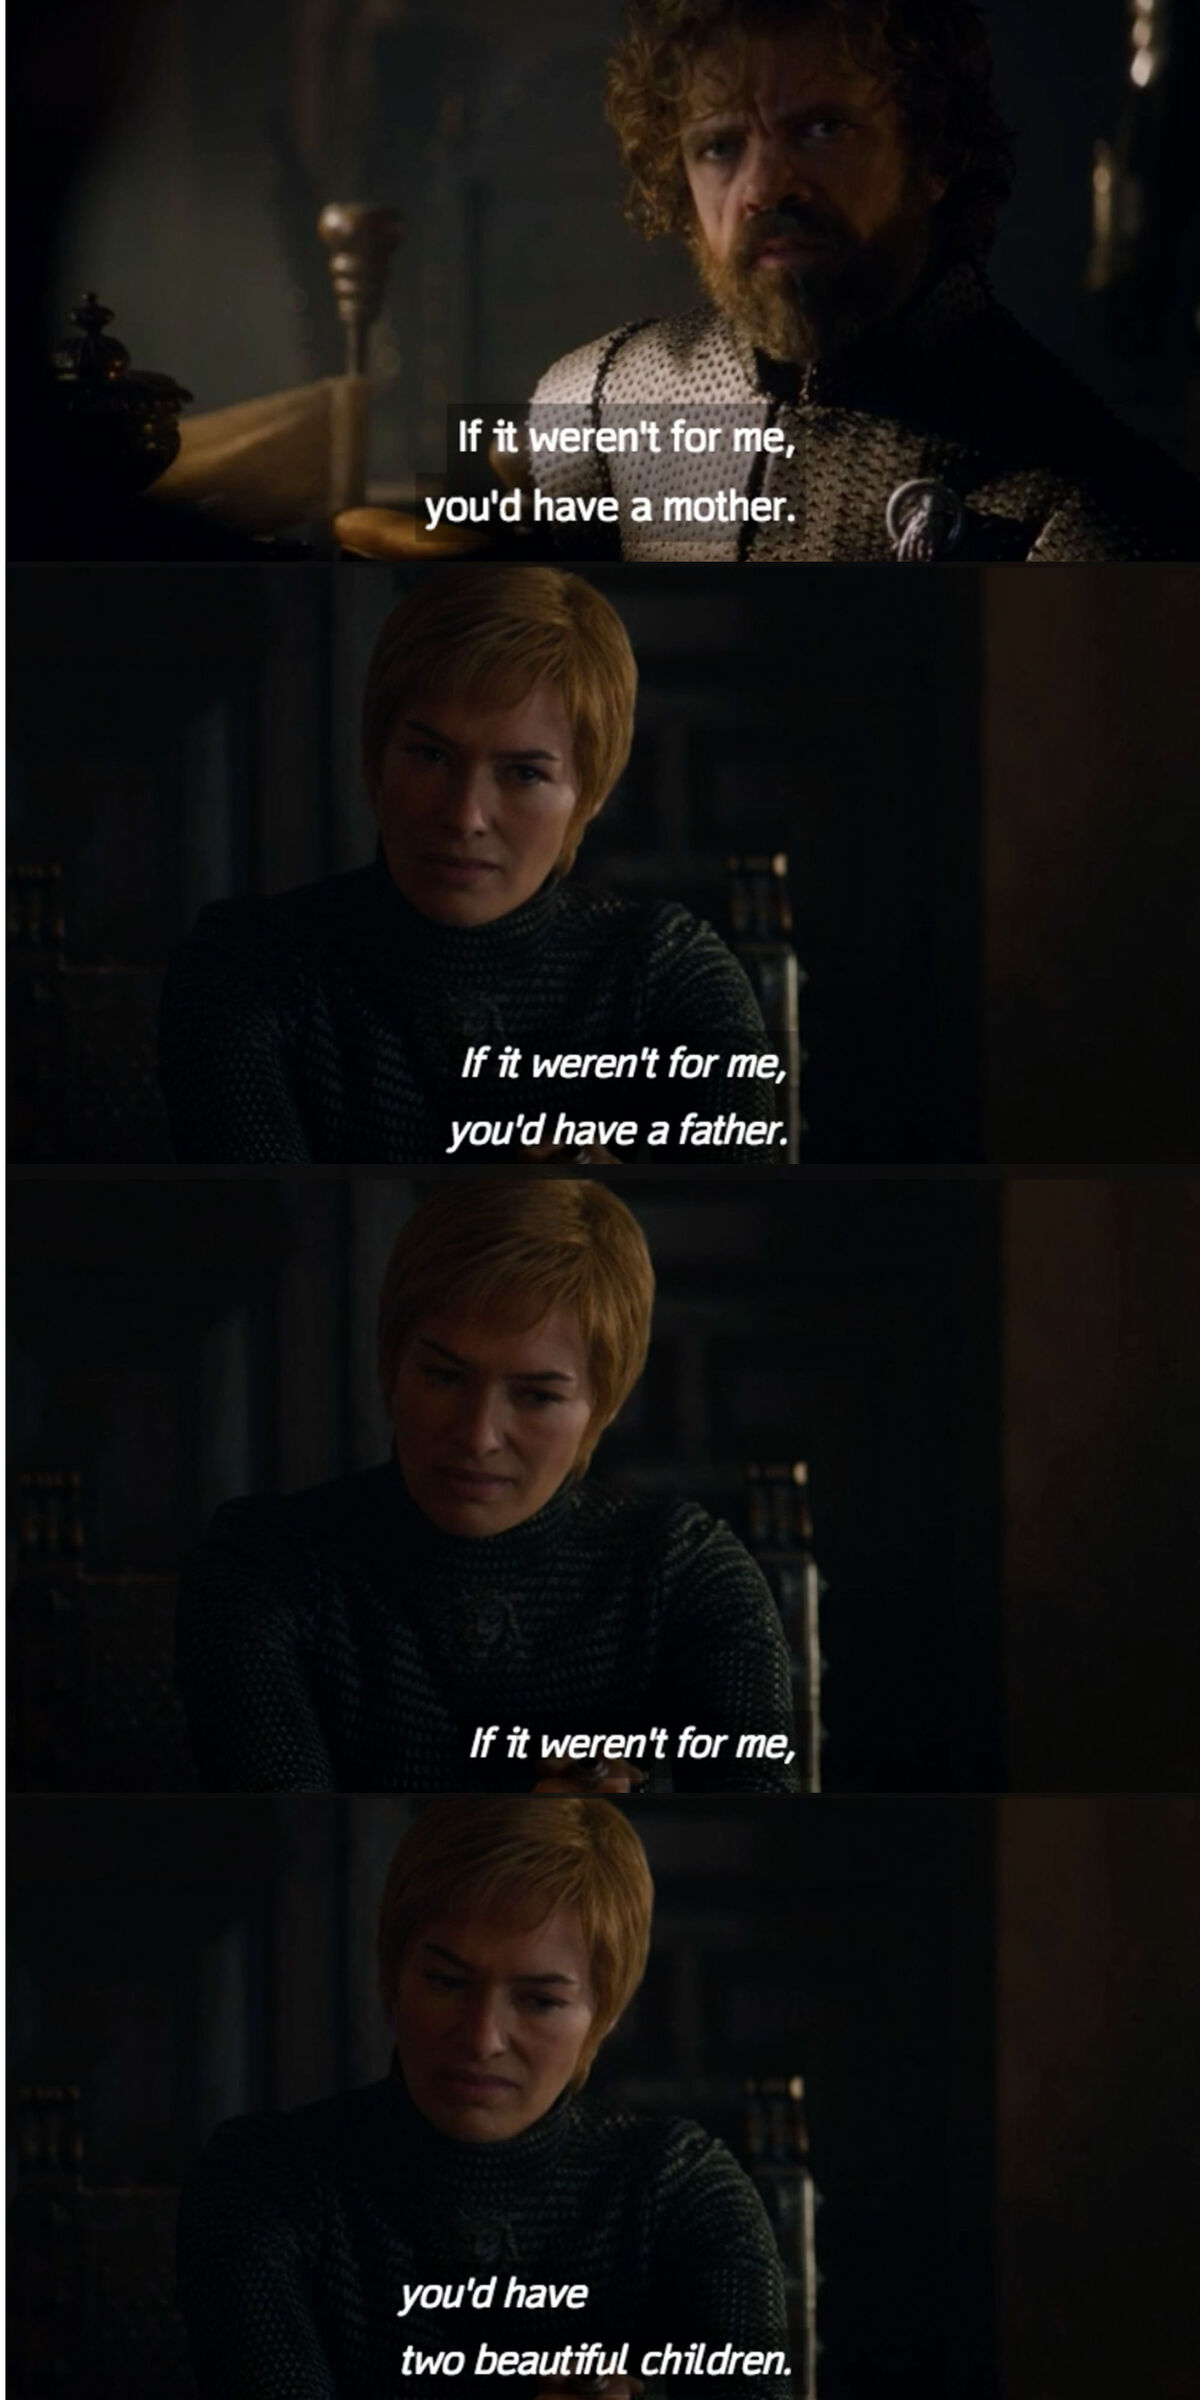 tyrion lannister, cersei lannister, season 7 finale, game of thrones